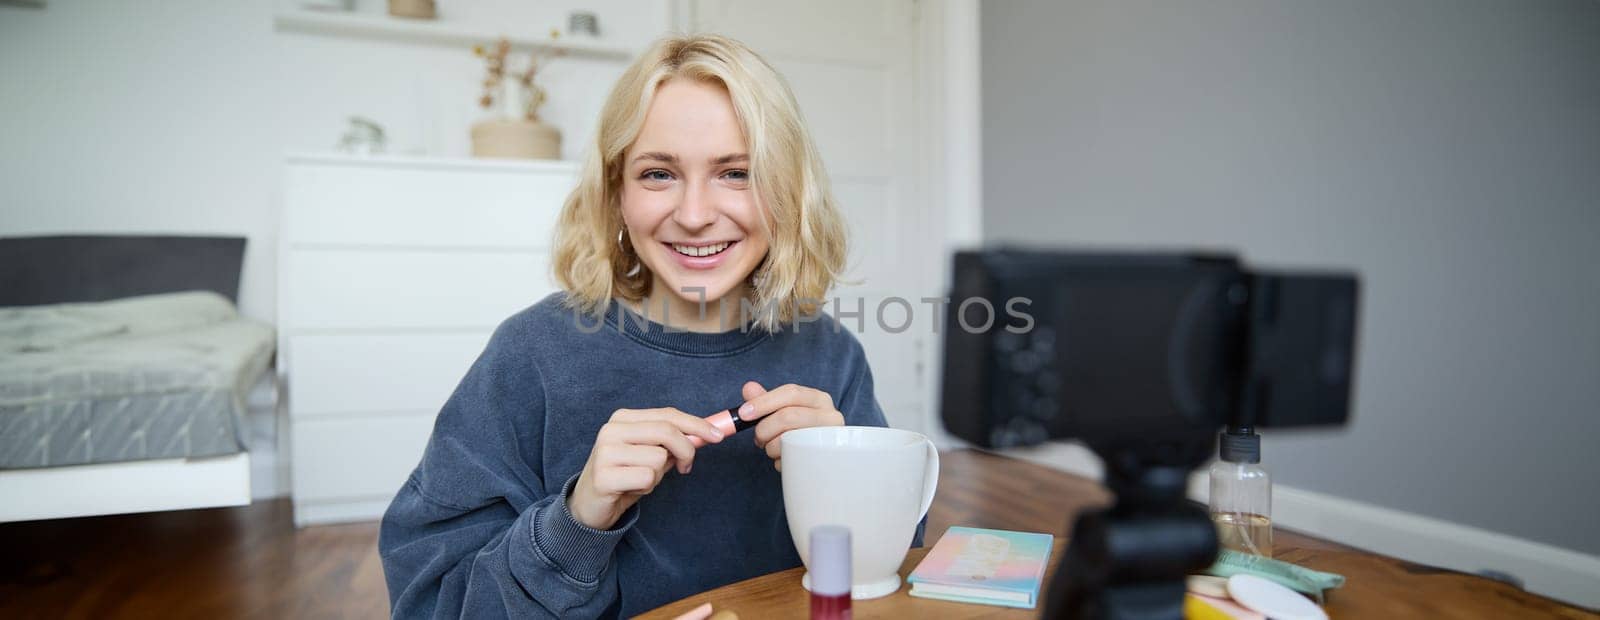 Portrait of beautiful, smiling blond woman, girl recording video of her makeup tutorial for social media, vlogger sitting on floor in her room, using stabiliser to create content, reviewing mascara.